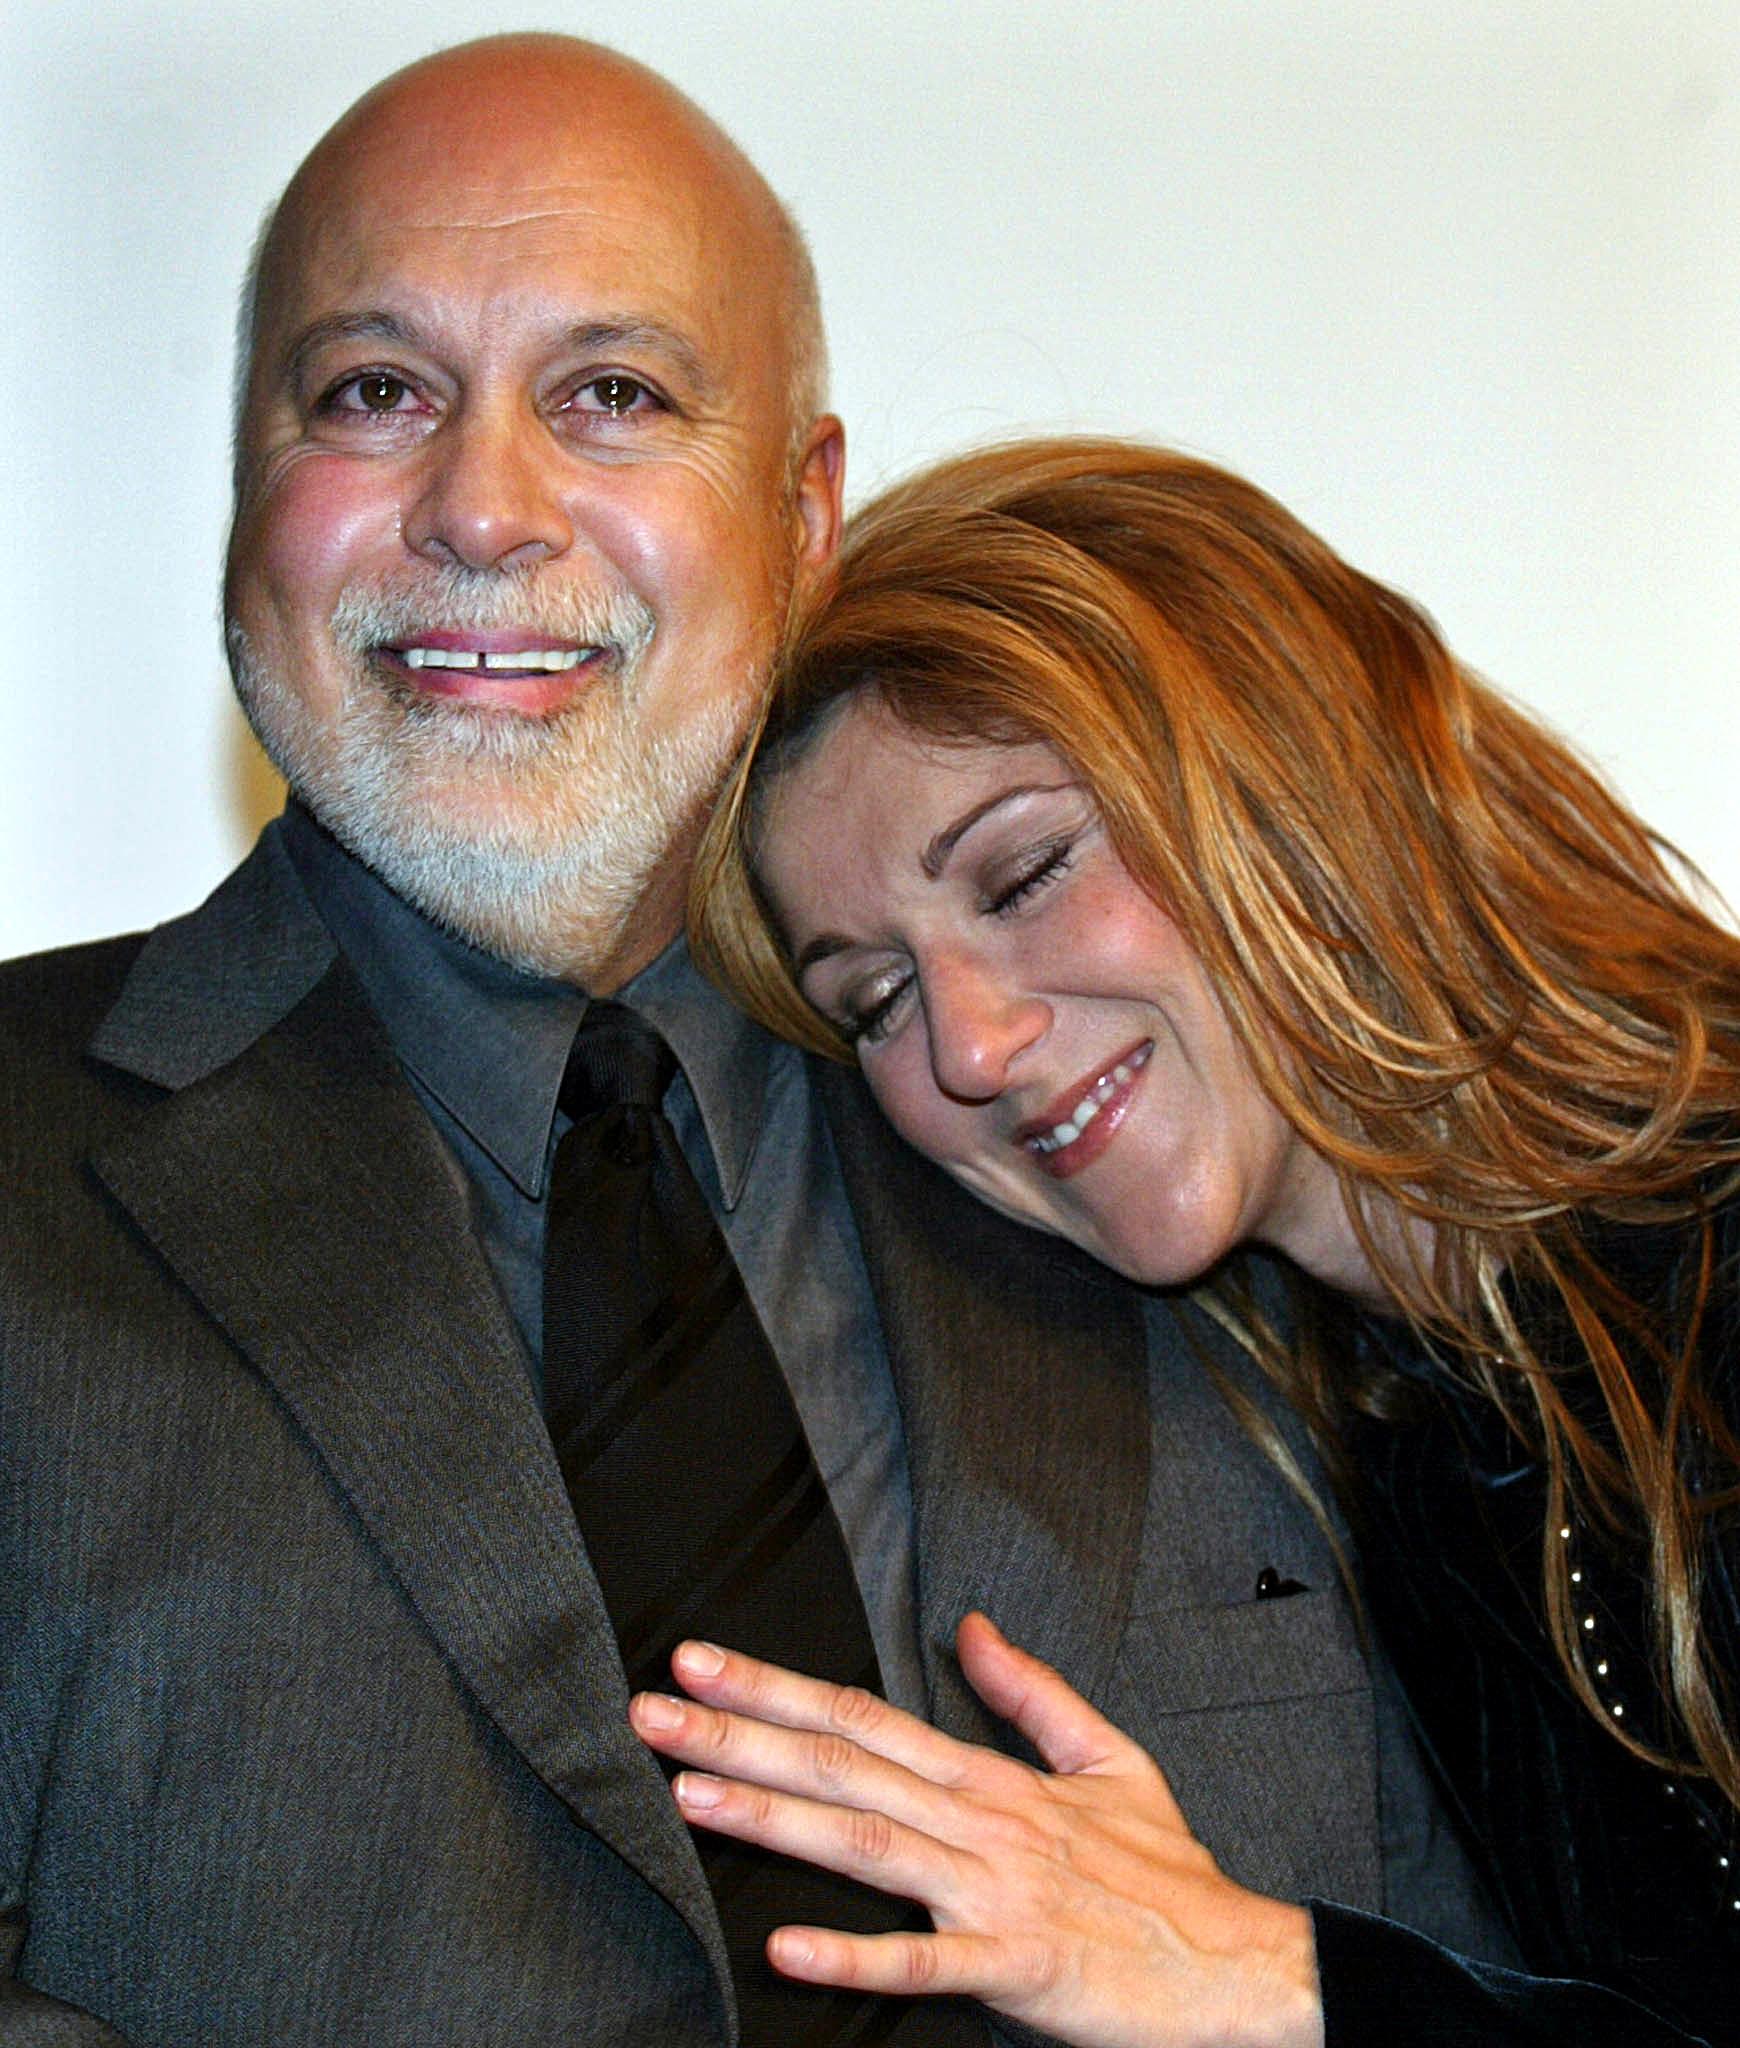 Celine Dion and her husband Rene Angeli in Montreal Canada in 2002. | Source: Getty Images 